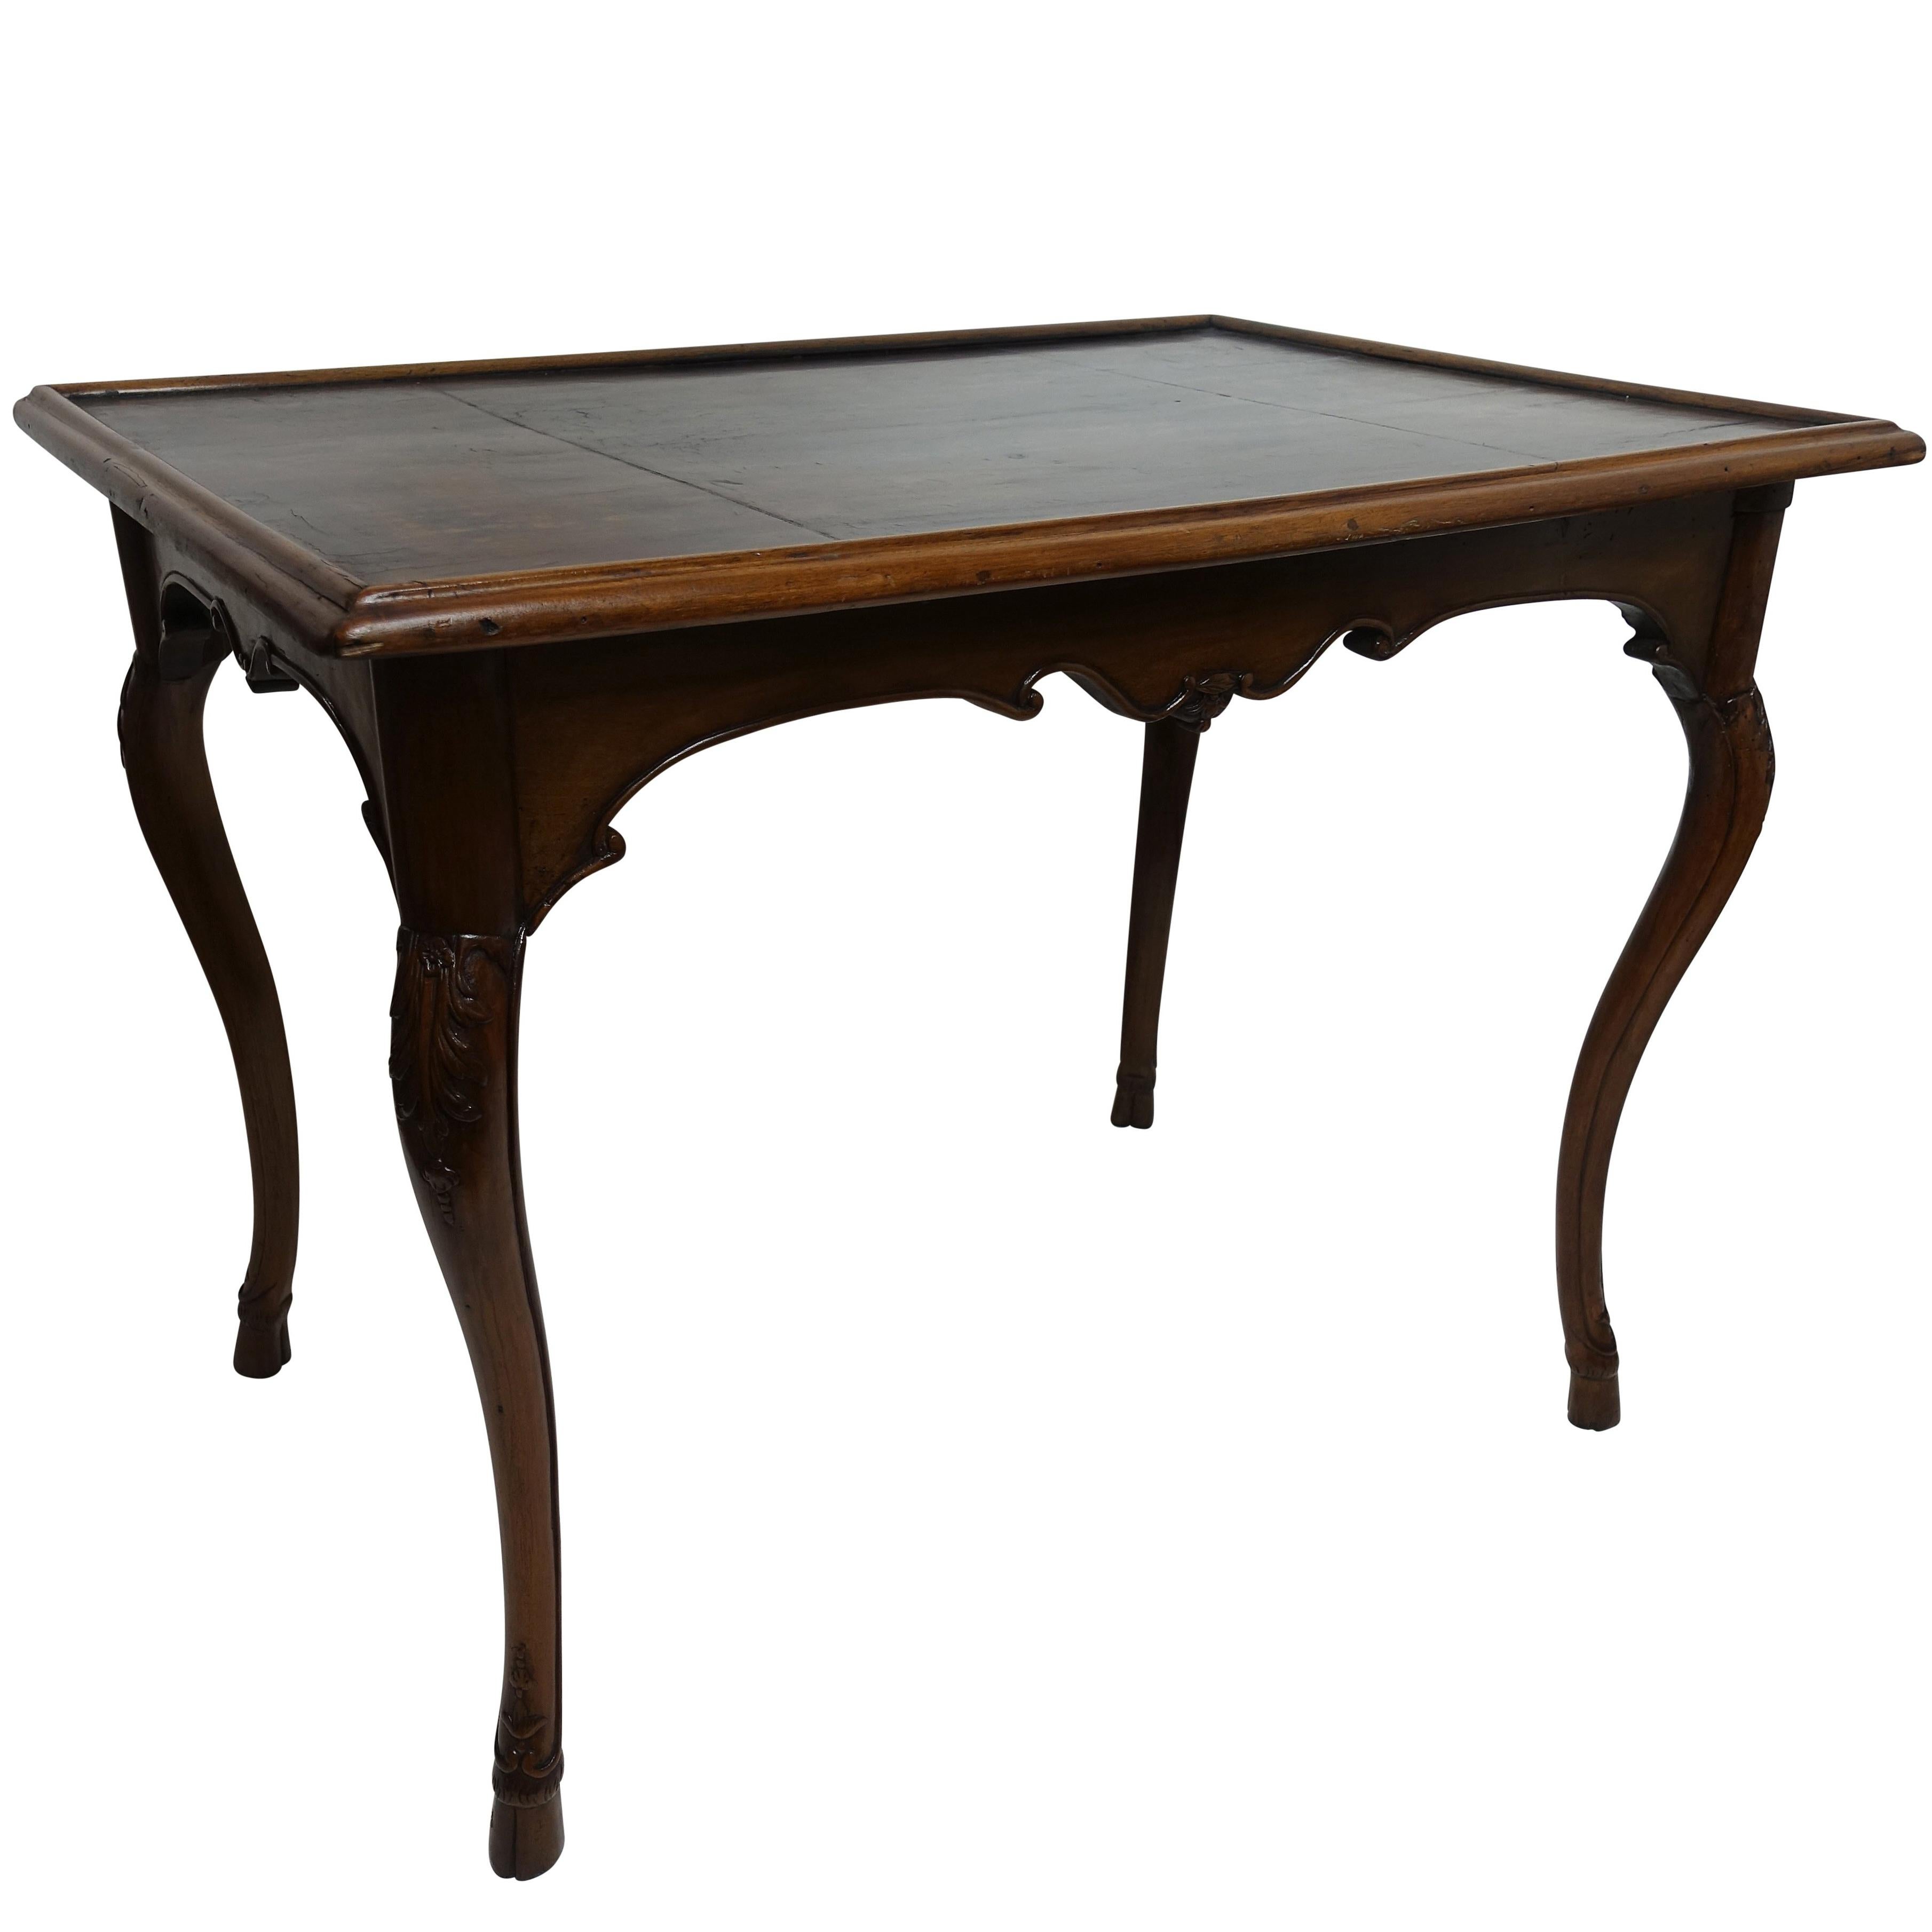 Carved Walnut Game Table with Inset Leather Top, French, 18th Century